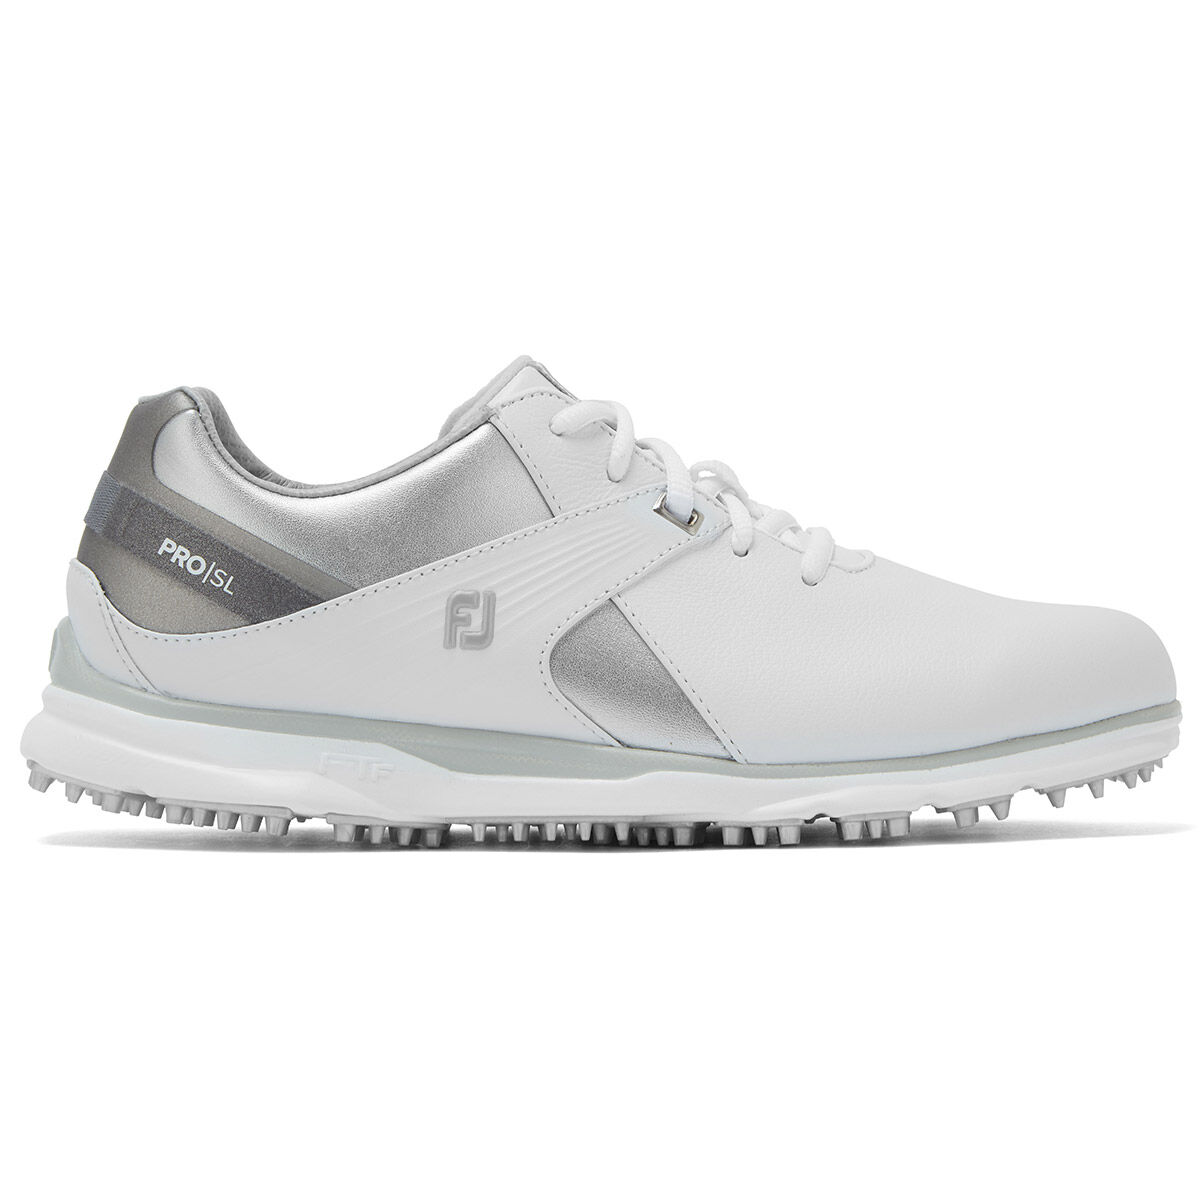 FootJoy Pro SL Ladies Shoes 2020 from 